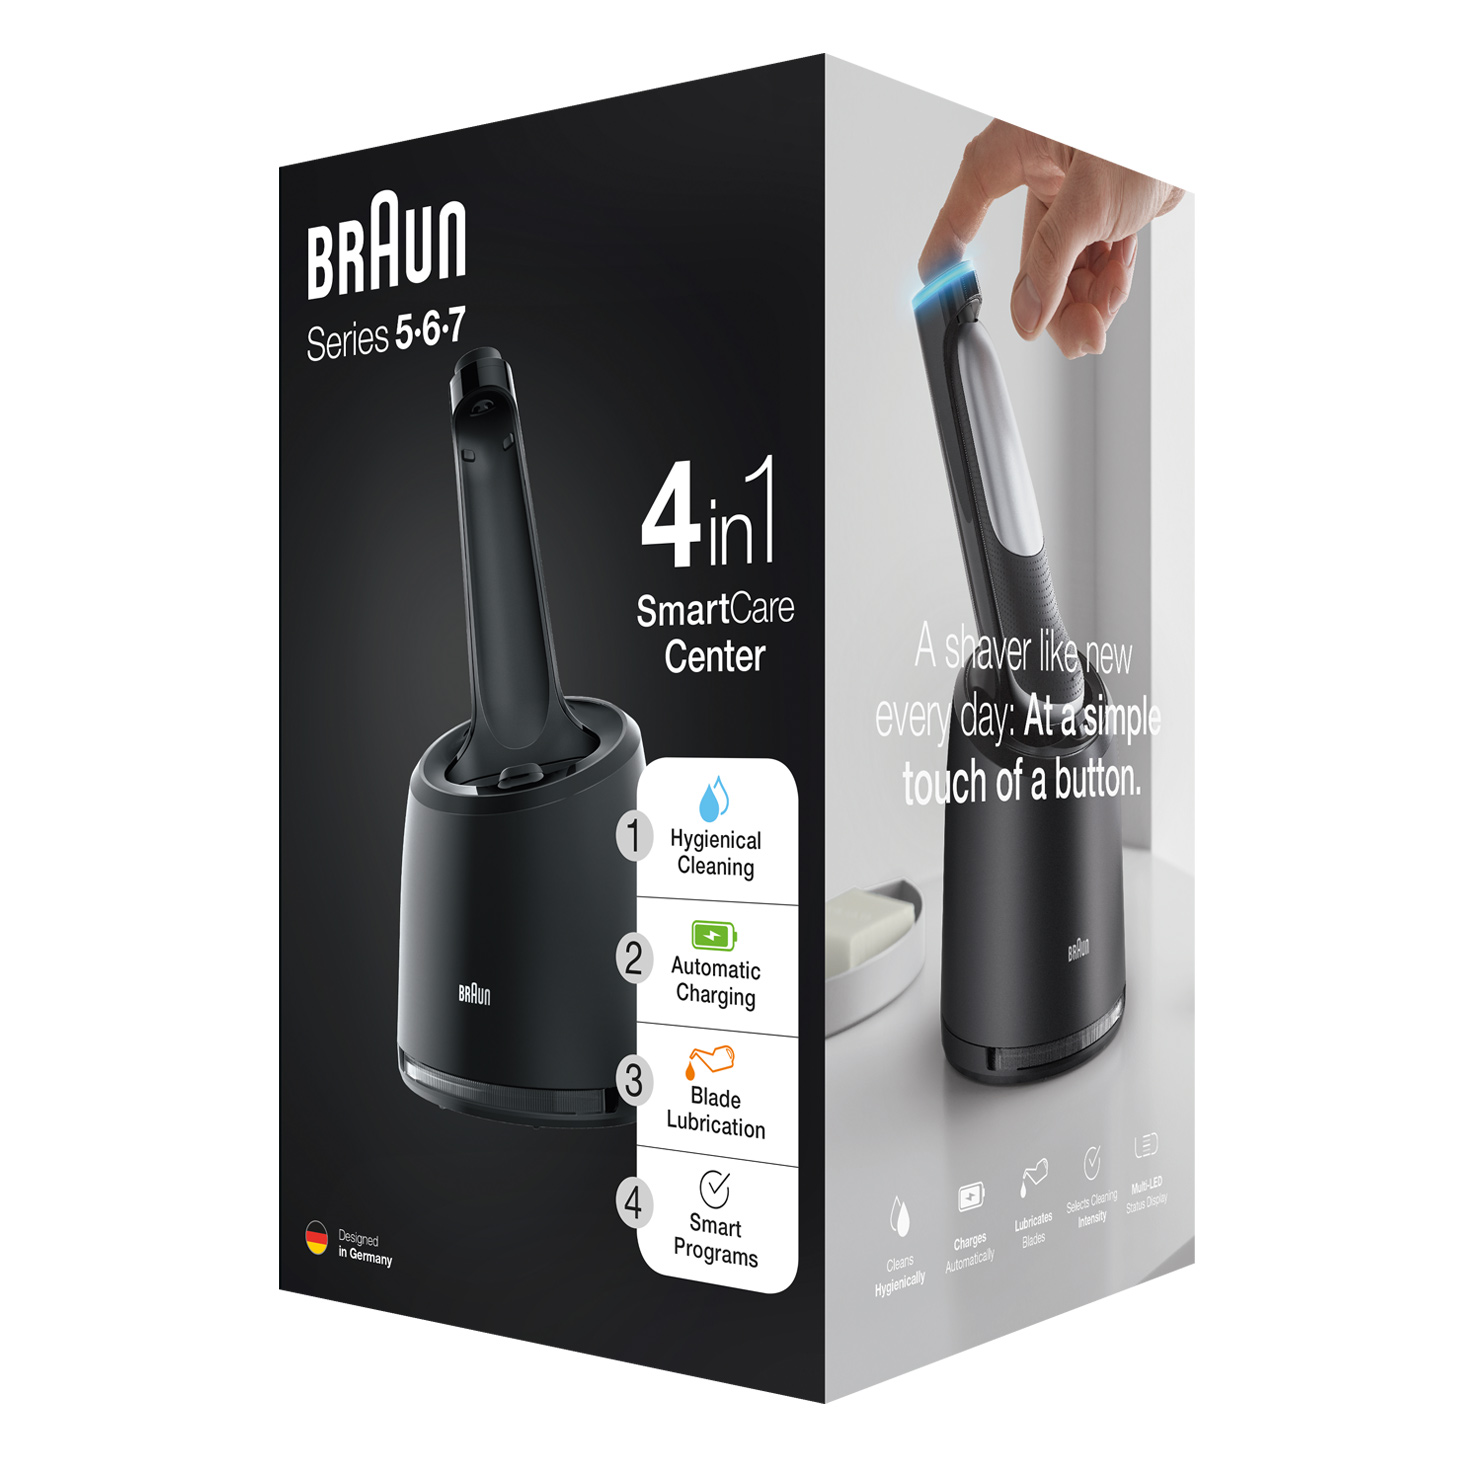 4 in 1 SmartCare Cleaning Center for Braun Series 5, 6 and 7